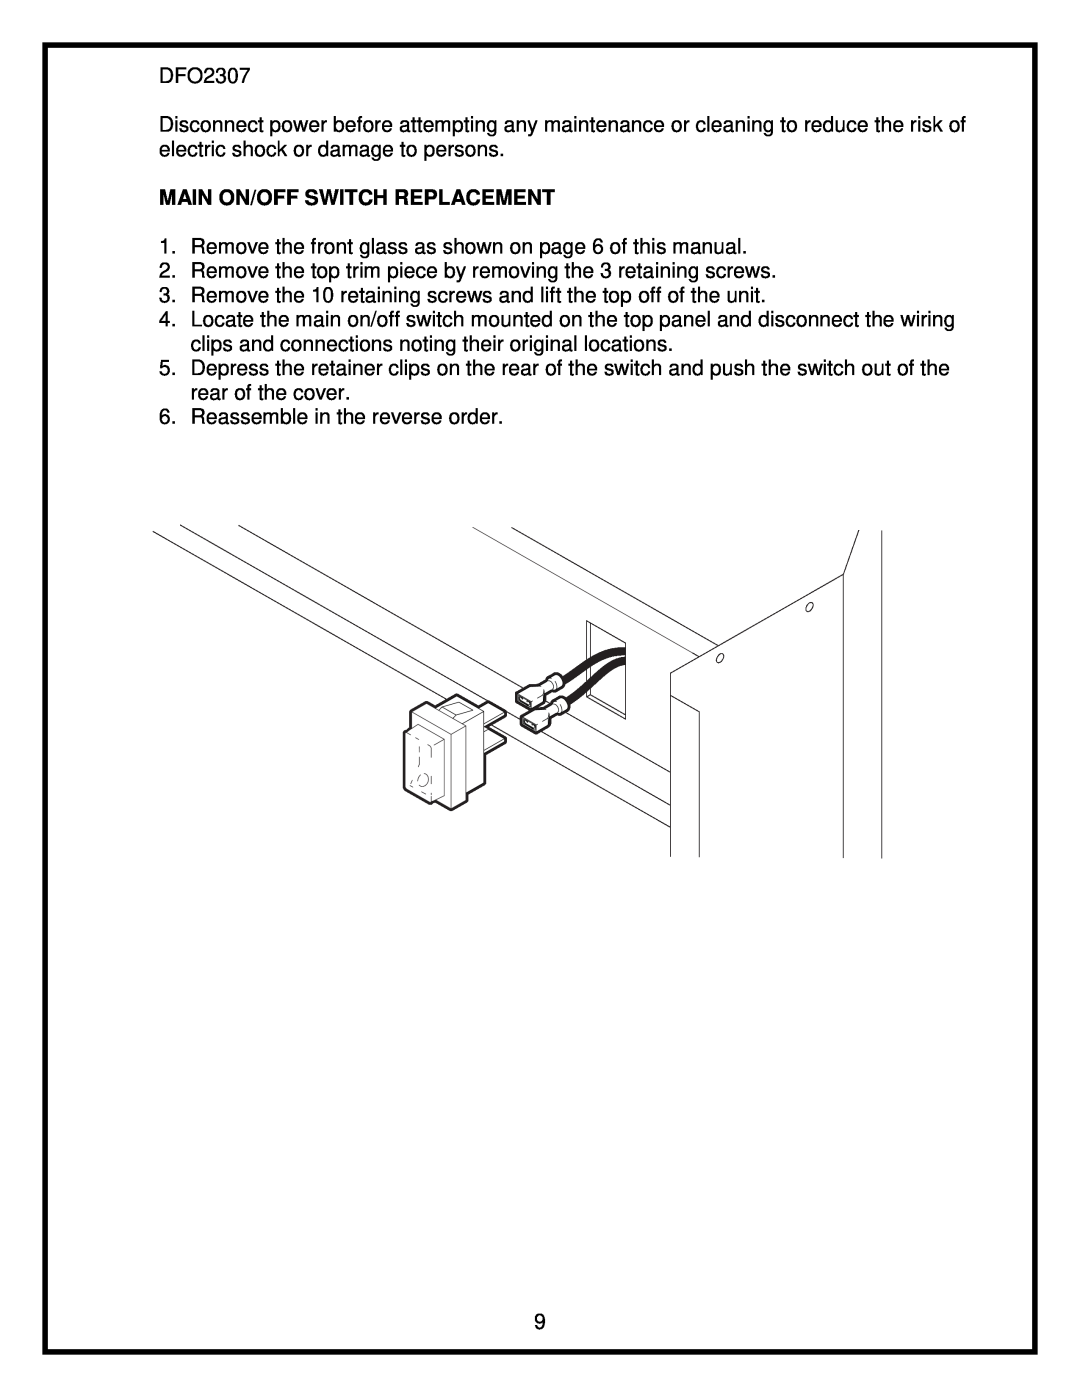 Dimplex DFO2307 service manual Main On/Off Switch Replacement 